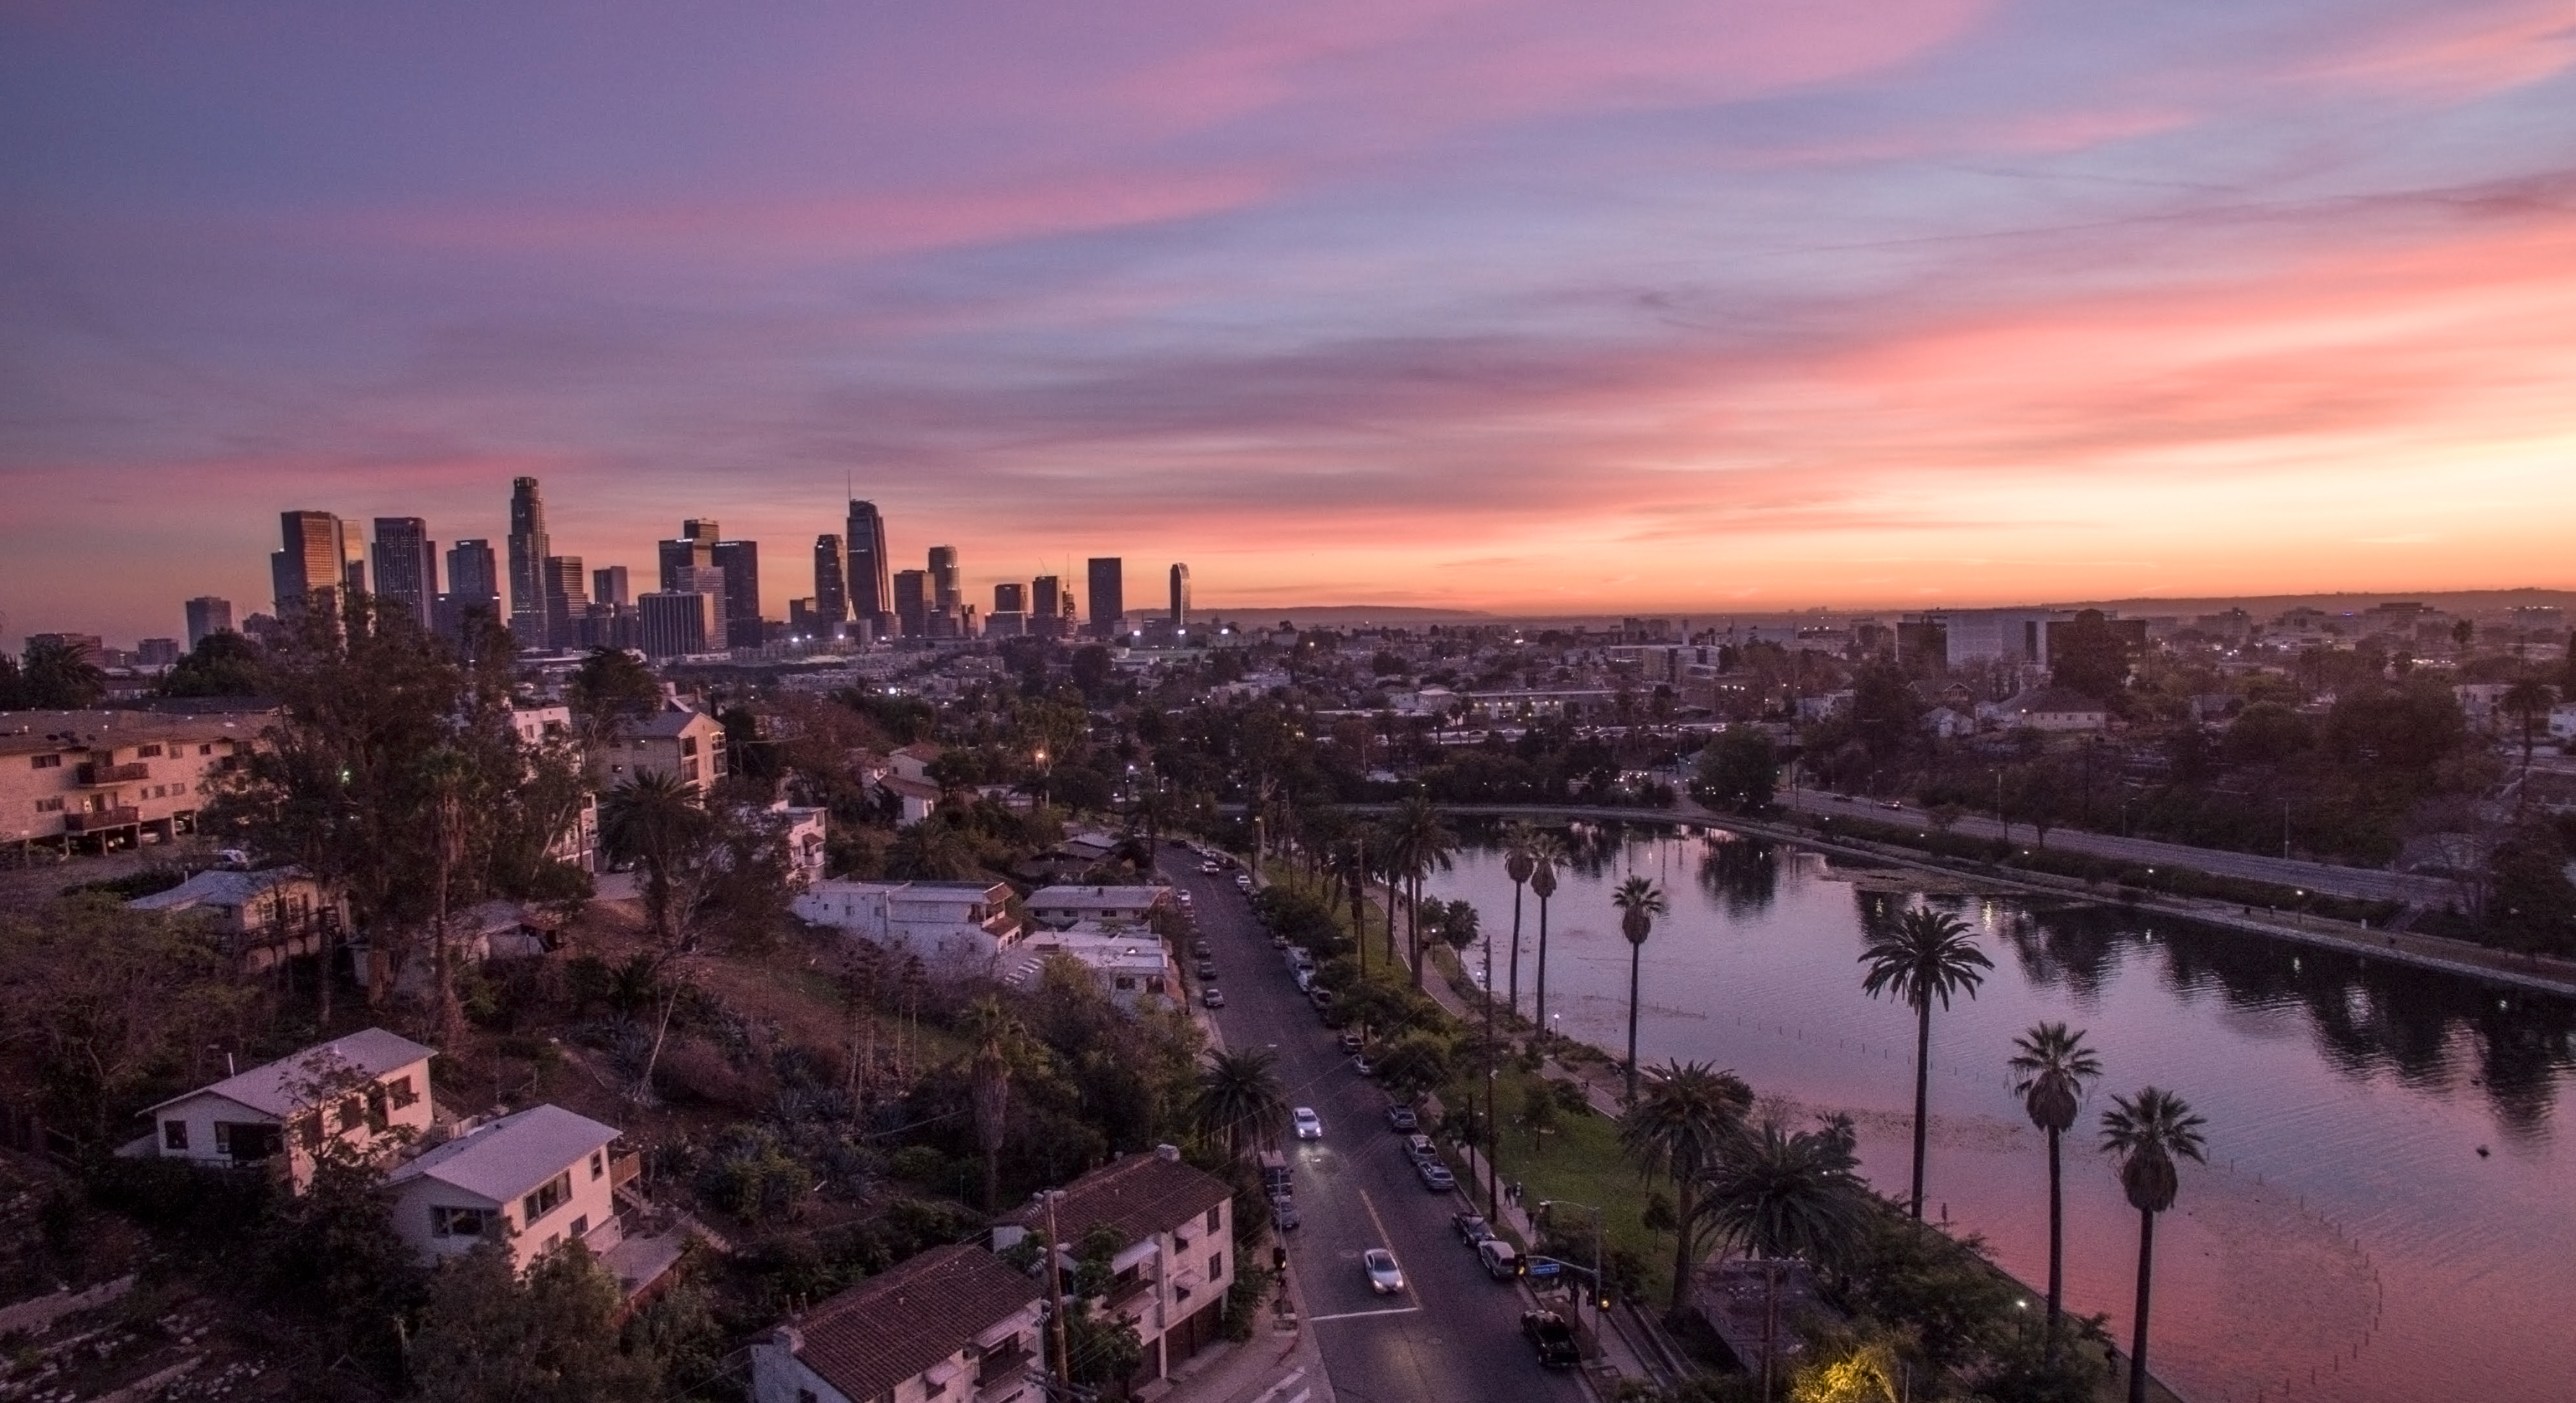 File:Echo Park Lake with Downtown Los Angeles Skyline.jpg - Wikimedia Commons